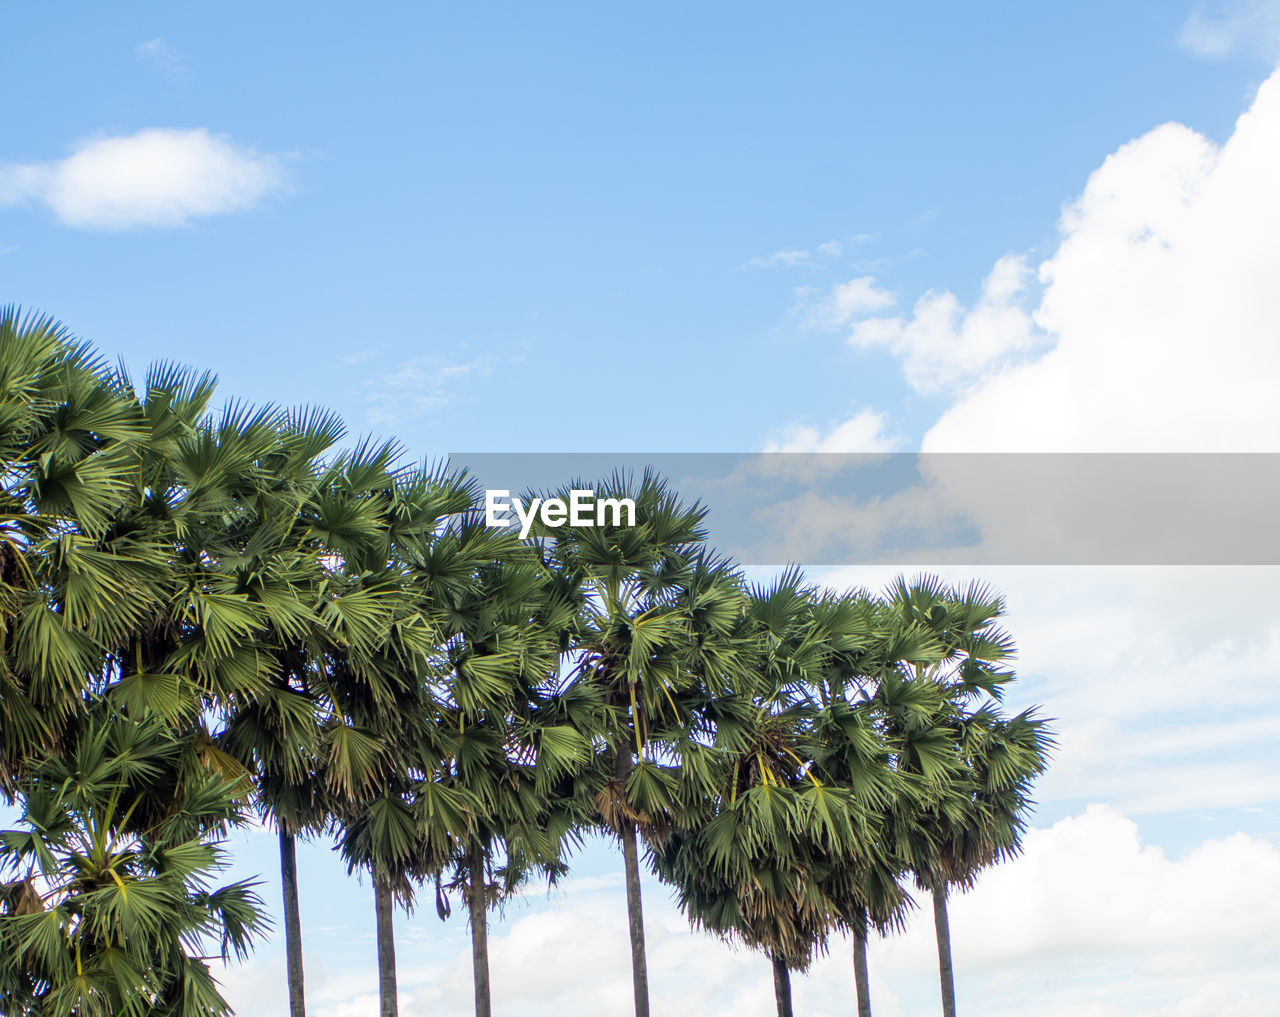 sky, tree, cloud, plant, palm tree, tropical climate, nature, beauty in nature, growth, leaf, coconut palm tree, low angle view, no people, tranquility, blue, tropical tree, land, day, outdoors, scenics - nature, flower, environment, travel, borassus flabellifer, green, sunlight, vacation, travel destinations, branch, holiday, tranquil scene, idyllic, trip, wind, plant part, palm leaf, cloudscape, water, summer, island, food and drink, grass, tourism